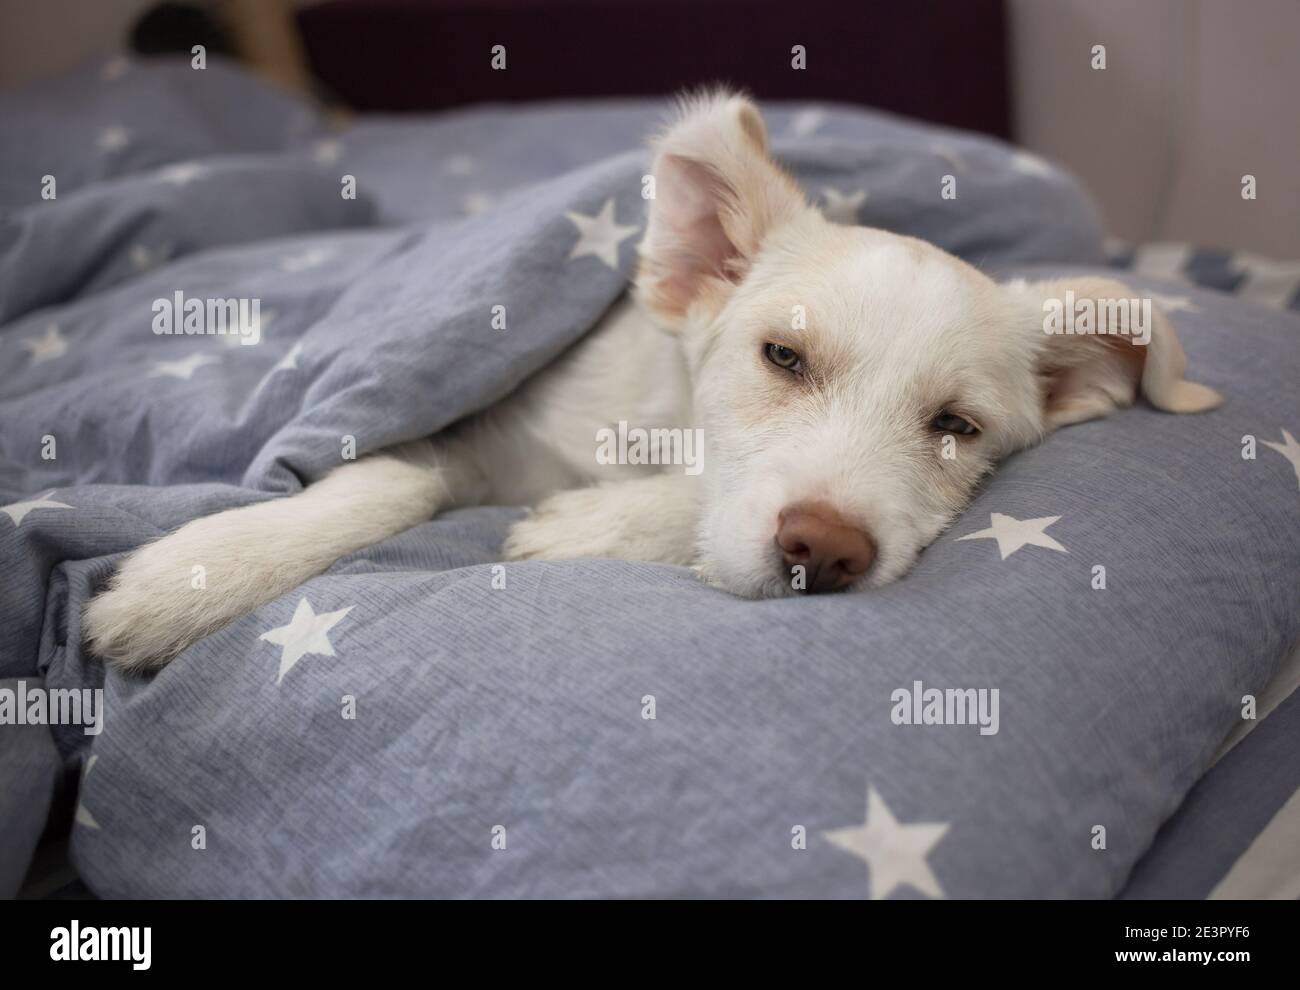 white cute puppy lies in a human bed on a pillow, covered with a blanket, enjoying a pleasant moment. Good morning, atmosphere of positive, cosiness a Stock Photo